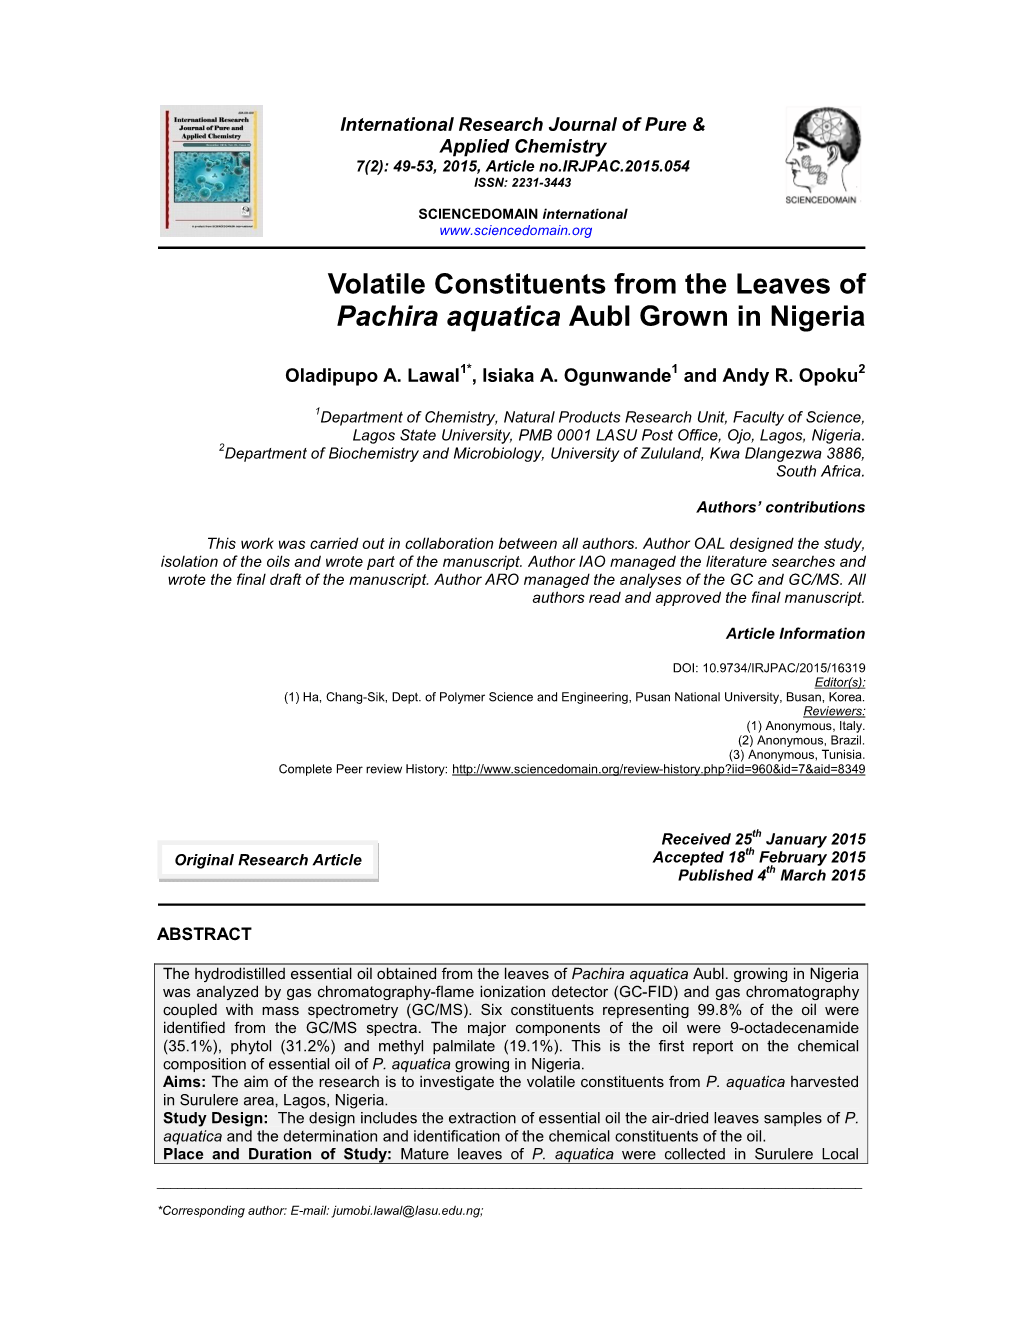 Volatile Constituents from the Leaves of Pachira Aquatica Aubl Grown in Nigeria